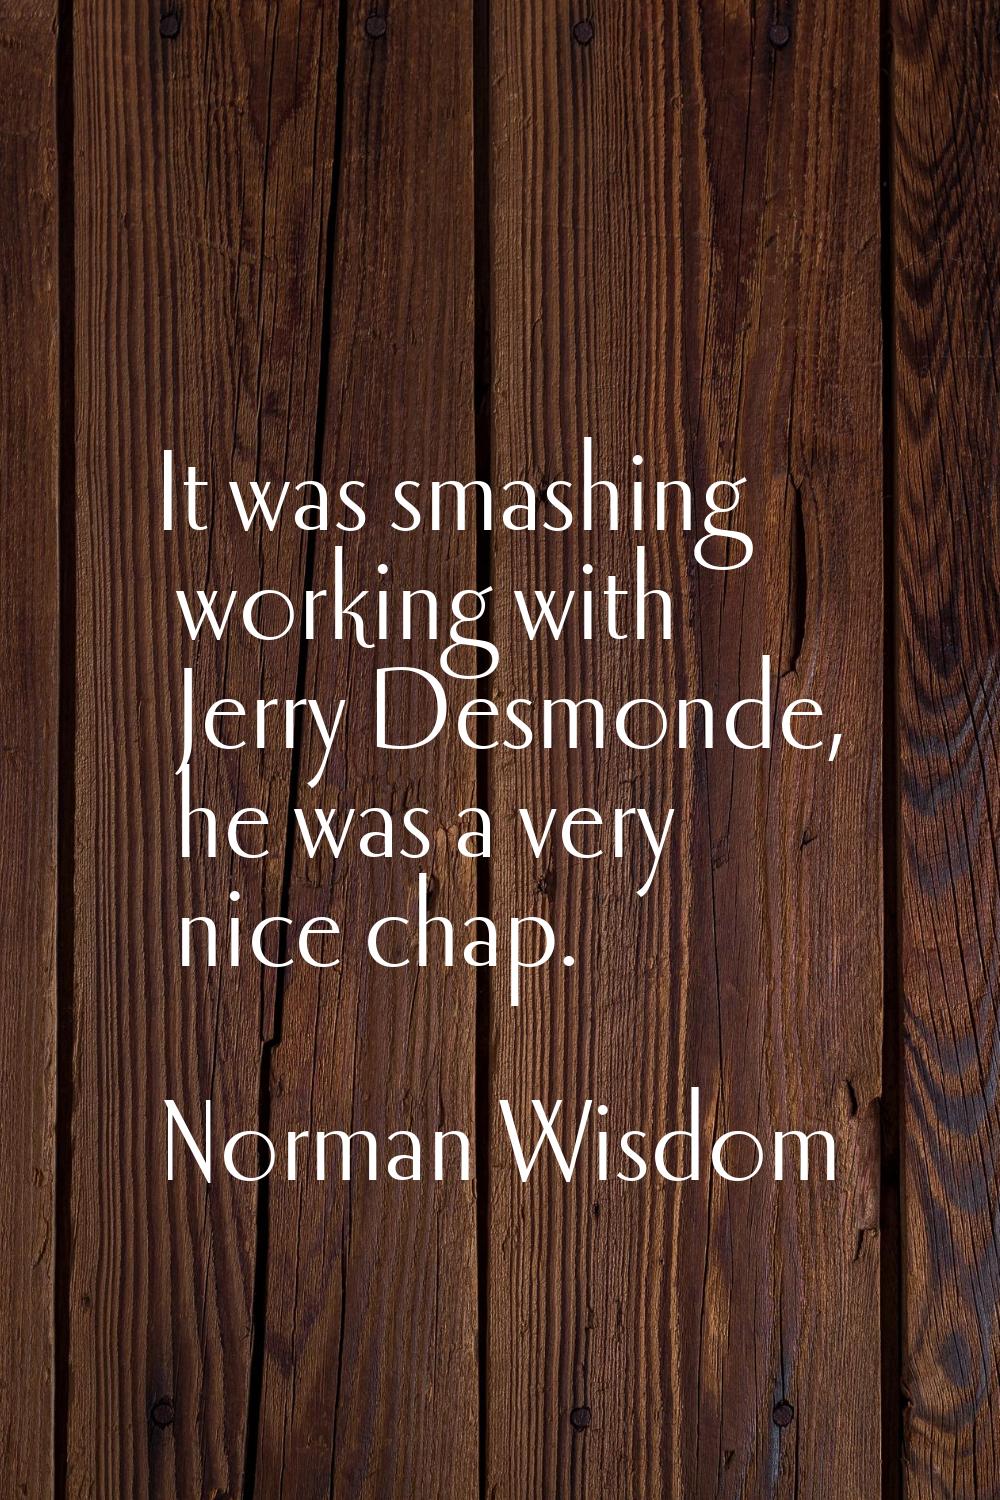 It was smashing working with Jerry Desmonde, he was a very nice chap.